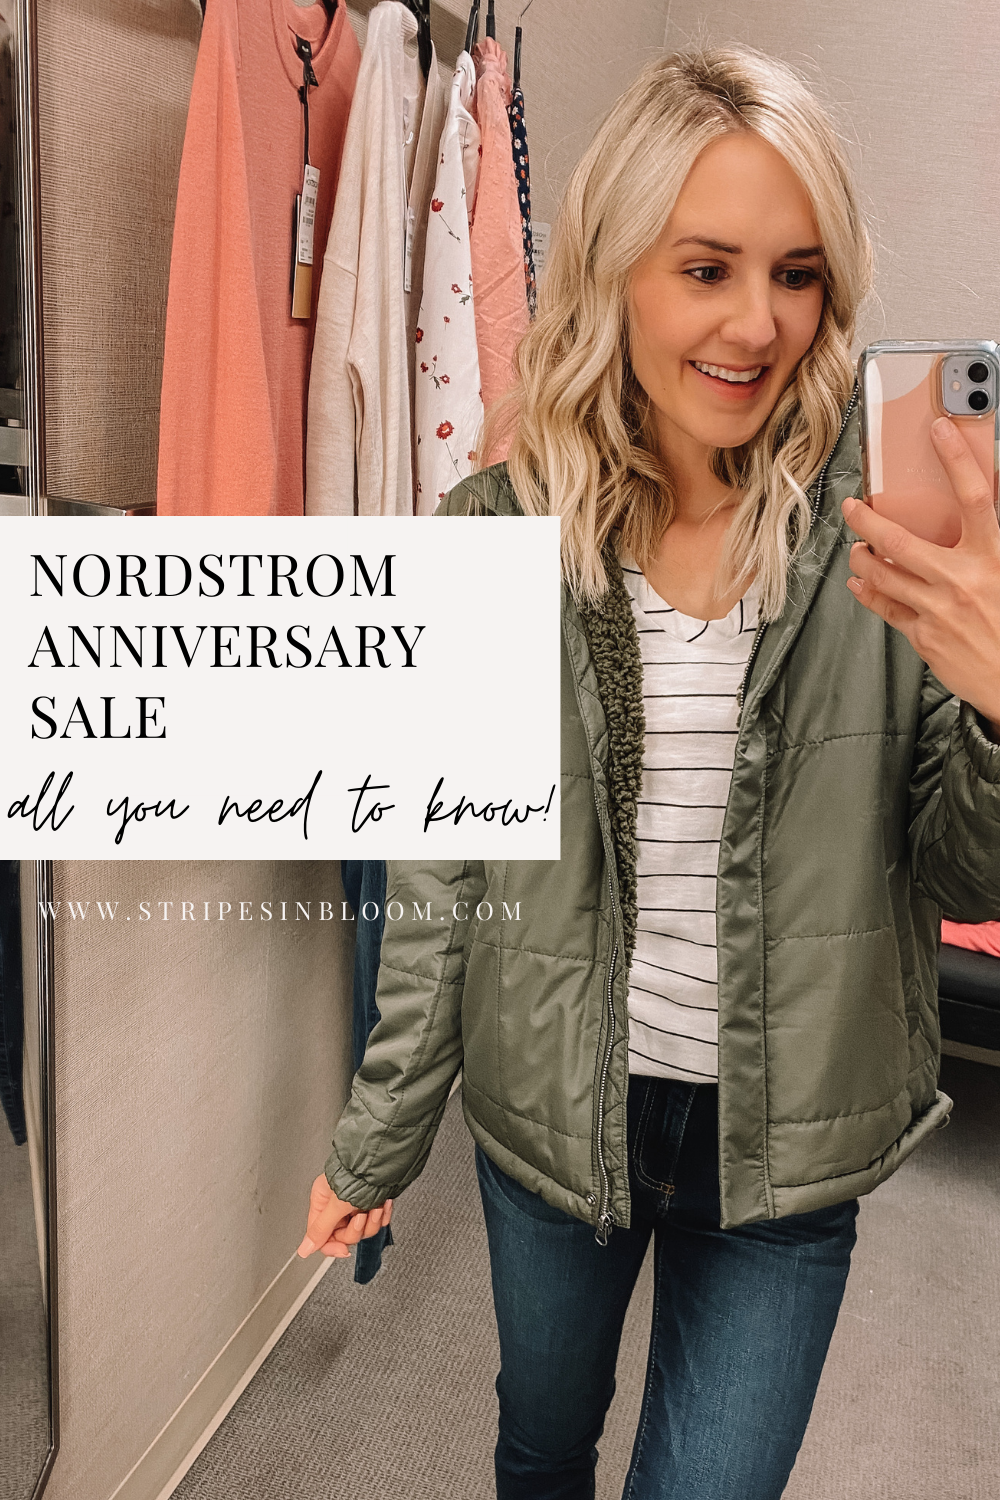 NORDSTROM ANNIVERSARY SALE – ALL YOU NEED TO KNOW